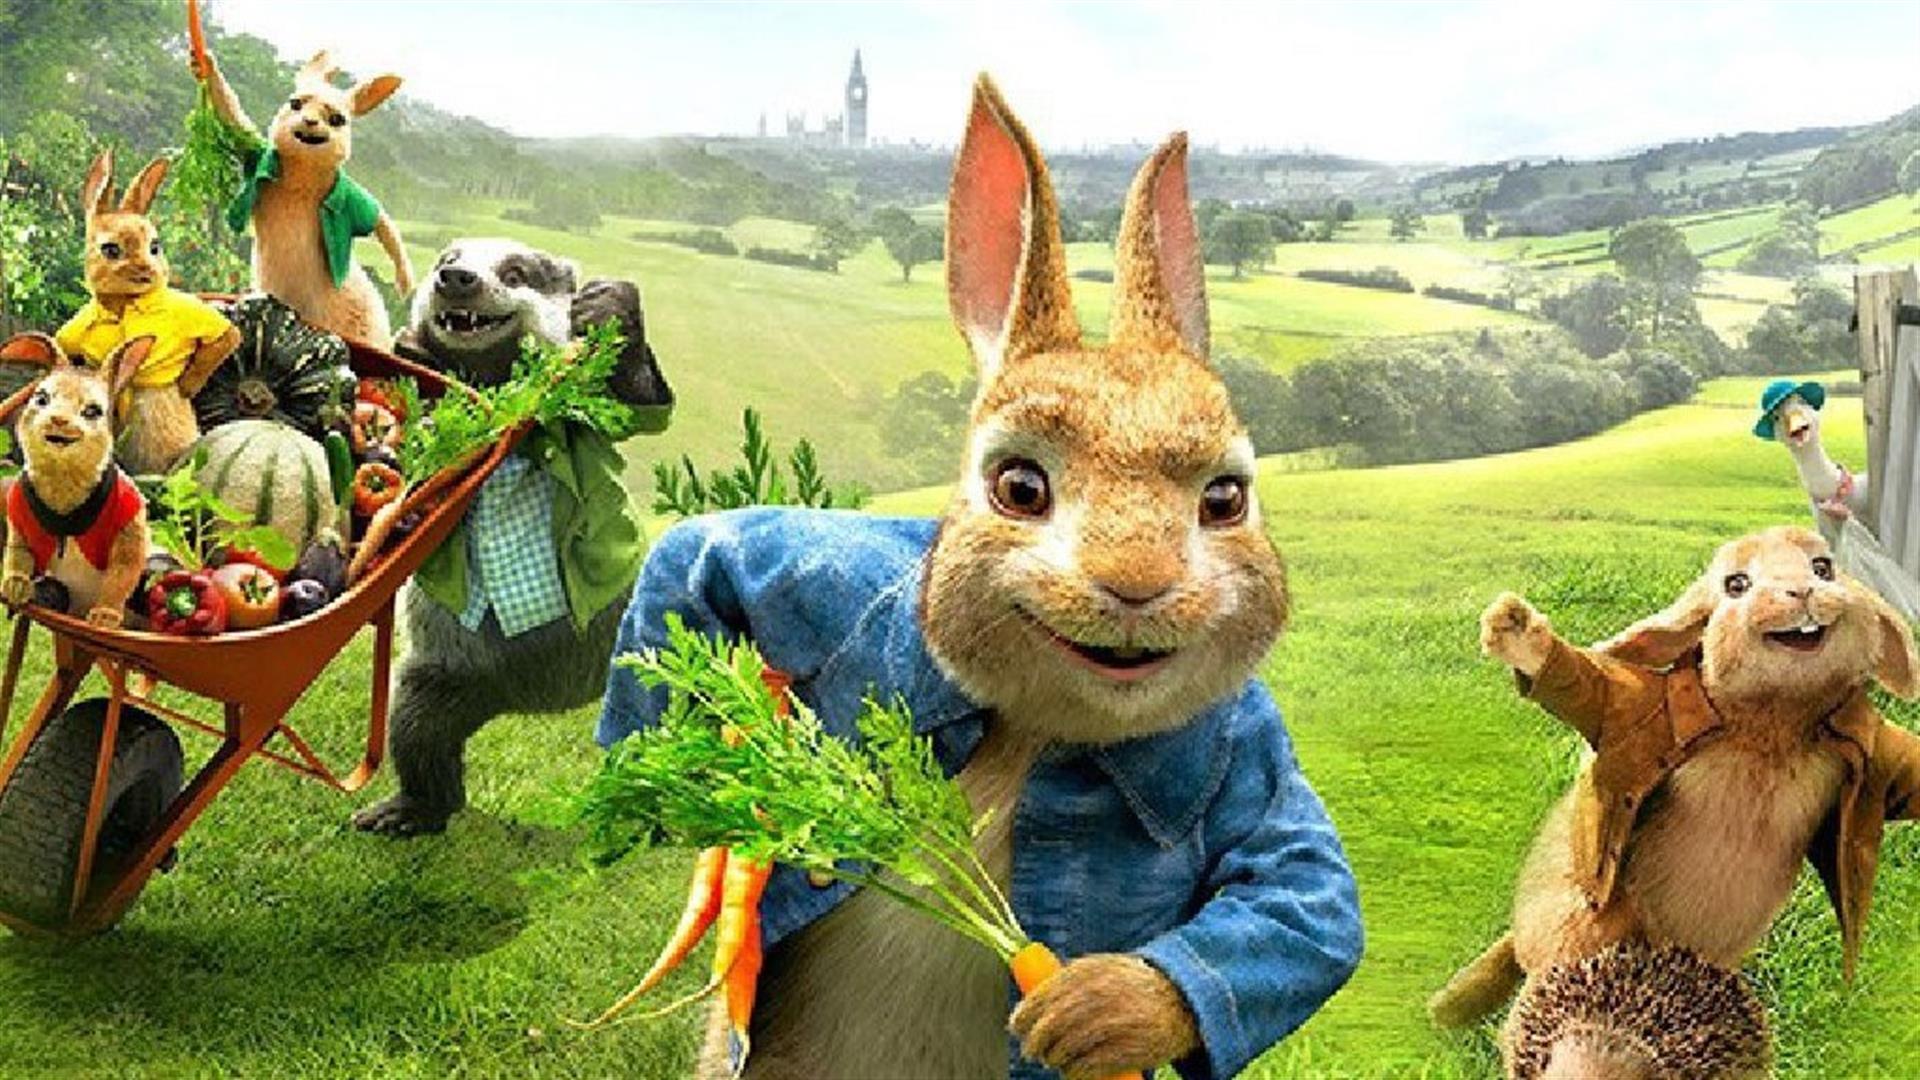 Peter Rabbit 2 (PG) – Lowther Drive In Cinema - Lowther Pavilion